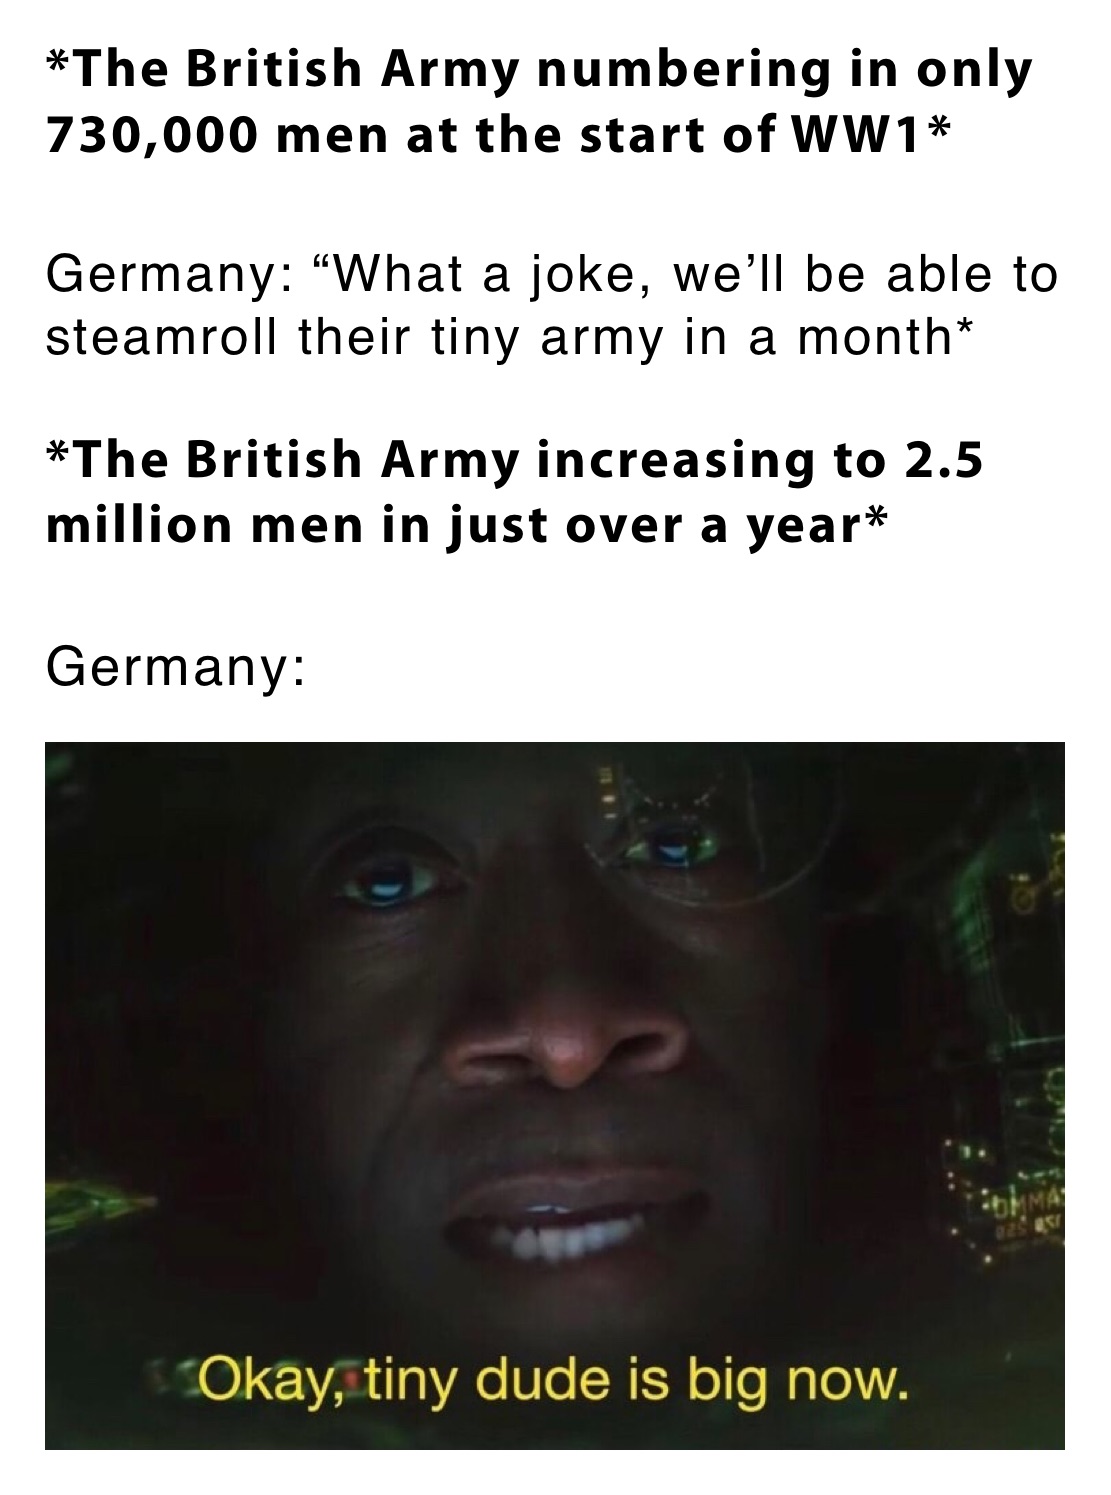 *The British Army numbering in only 730,000 men at the start of WW1*

Germany: “What a joke, we’ll be able to steamroll their tiny army in a month*

*The British Army increasing to 2.5 million men in just over a year*

Germany: